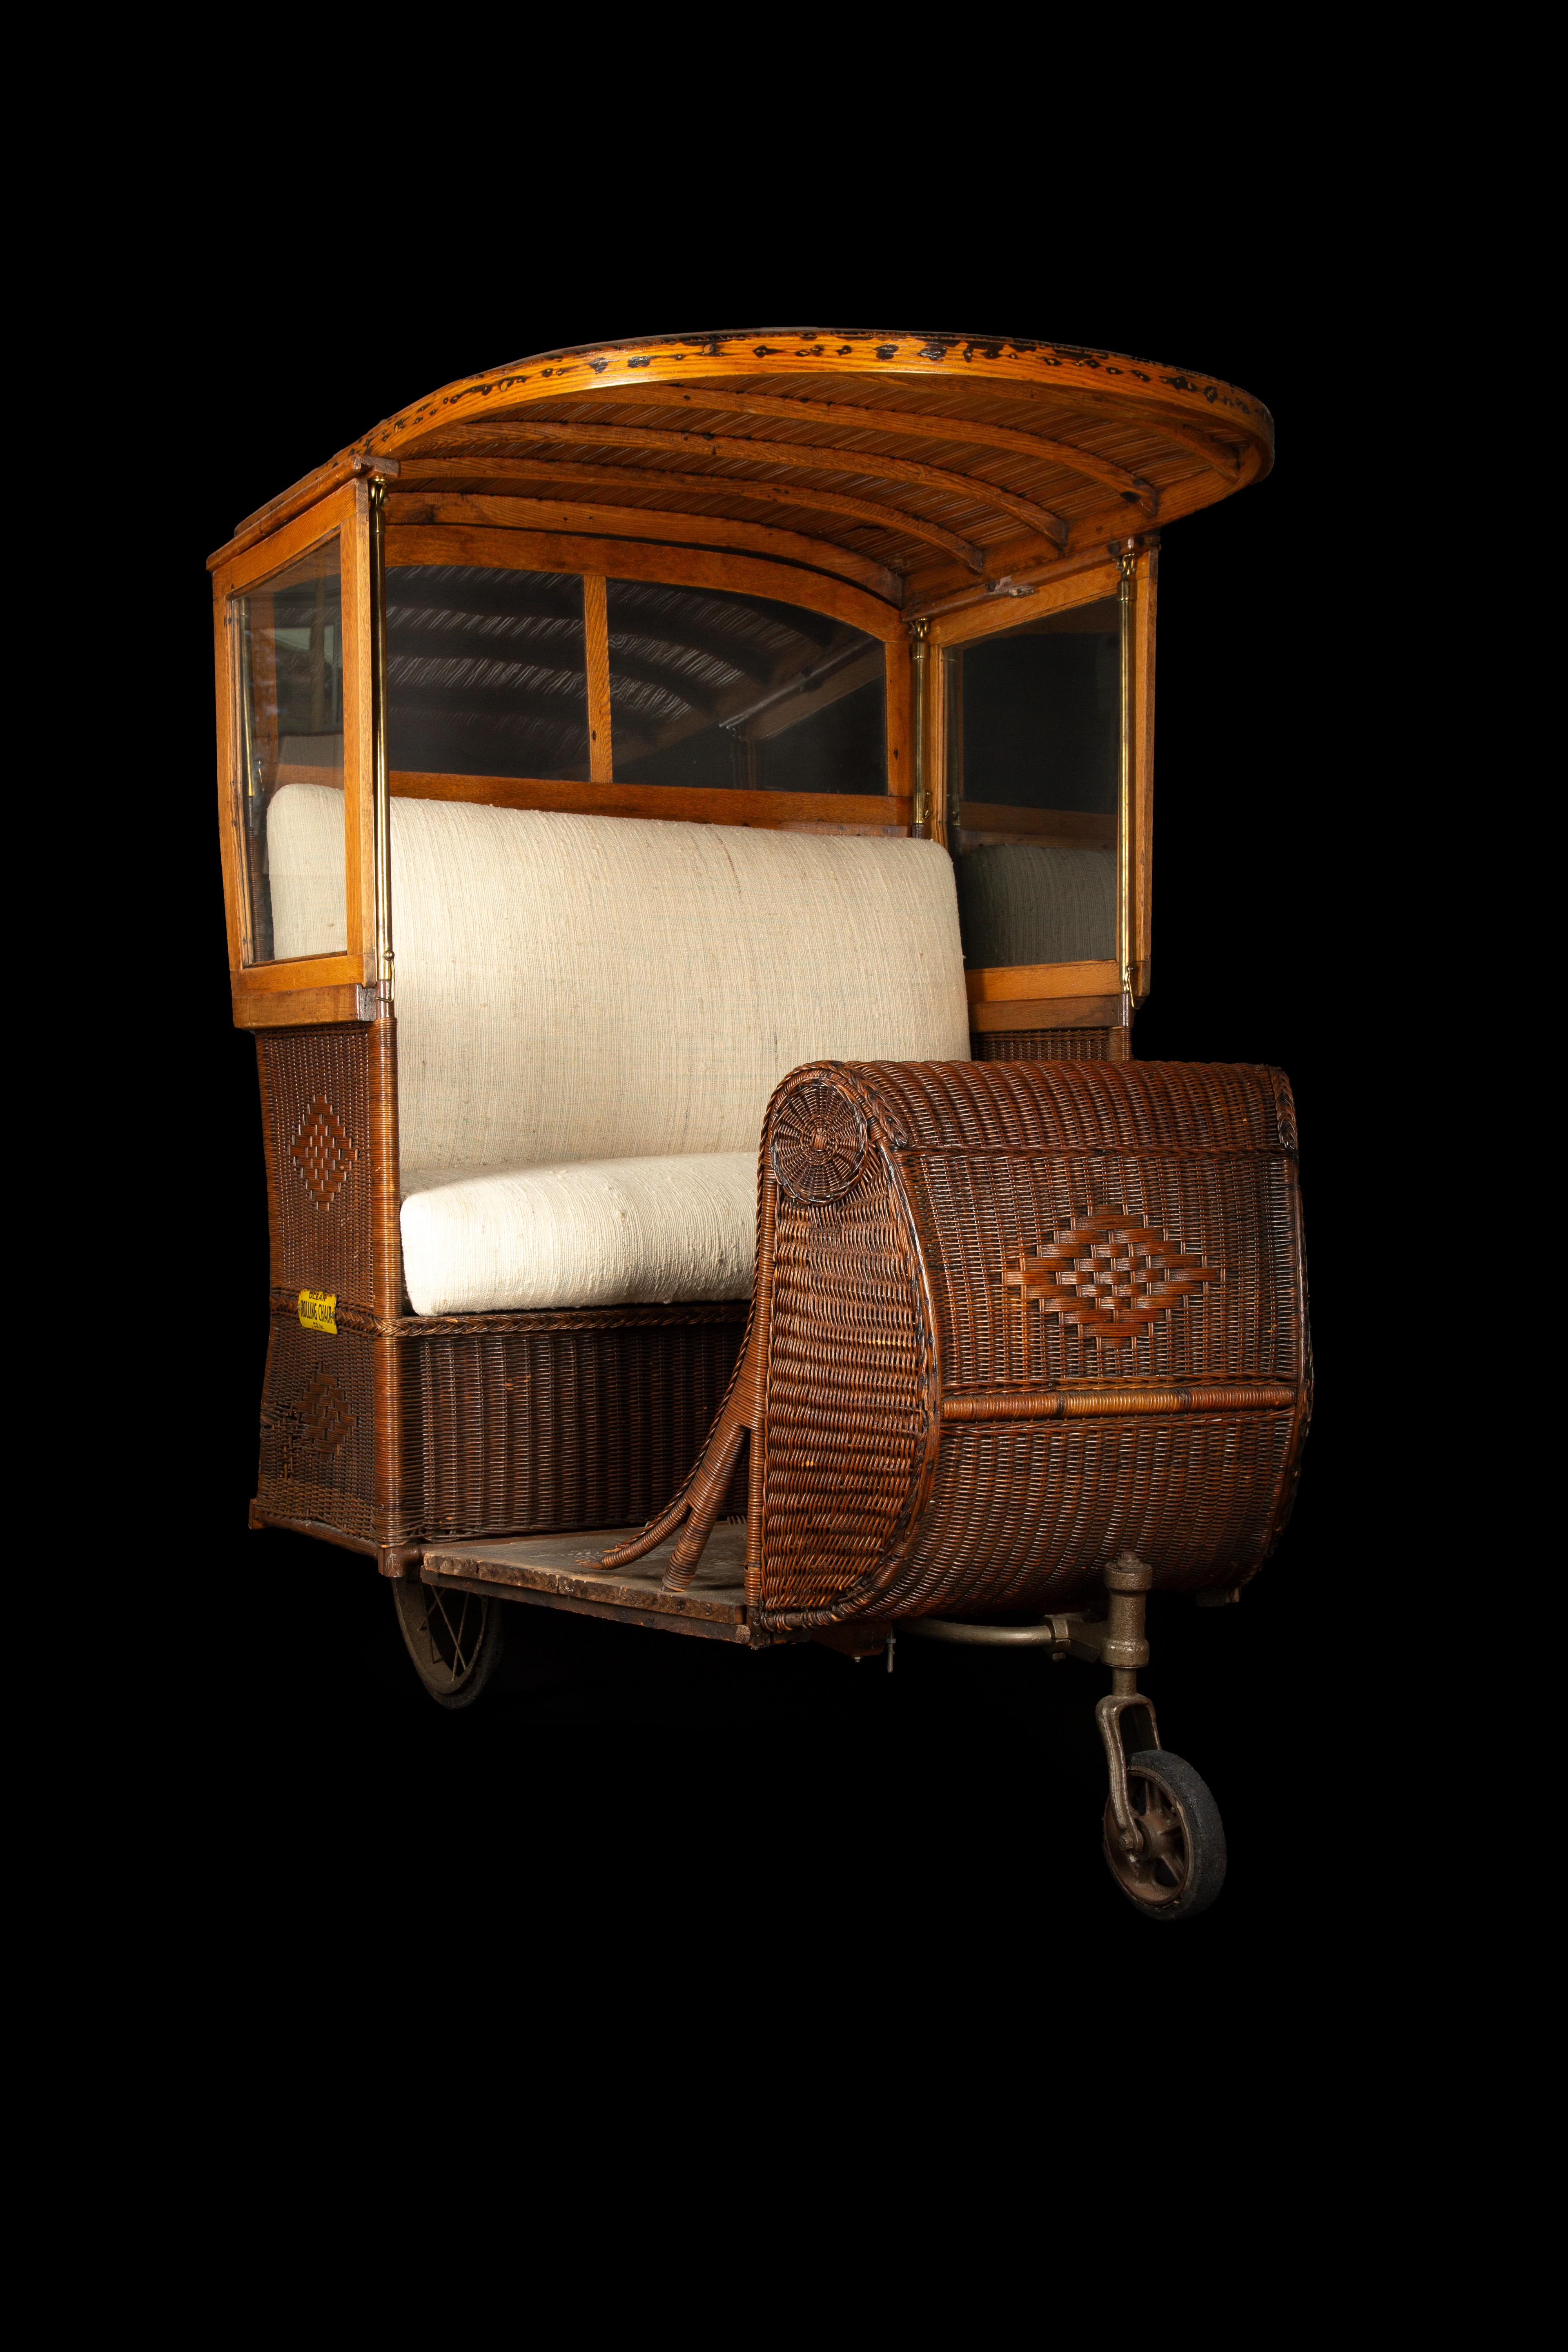 Step back in time with this fun Early 20th Century Wicker Boardwalk rolling cart crafted by the renowned 